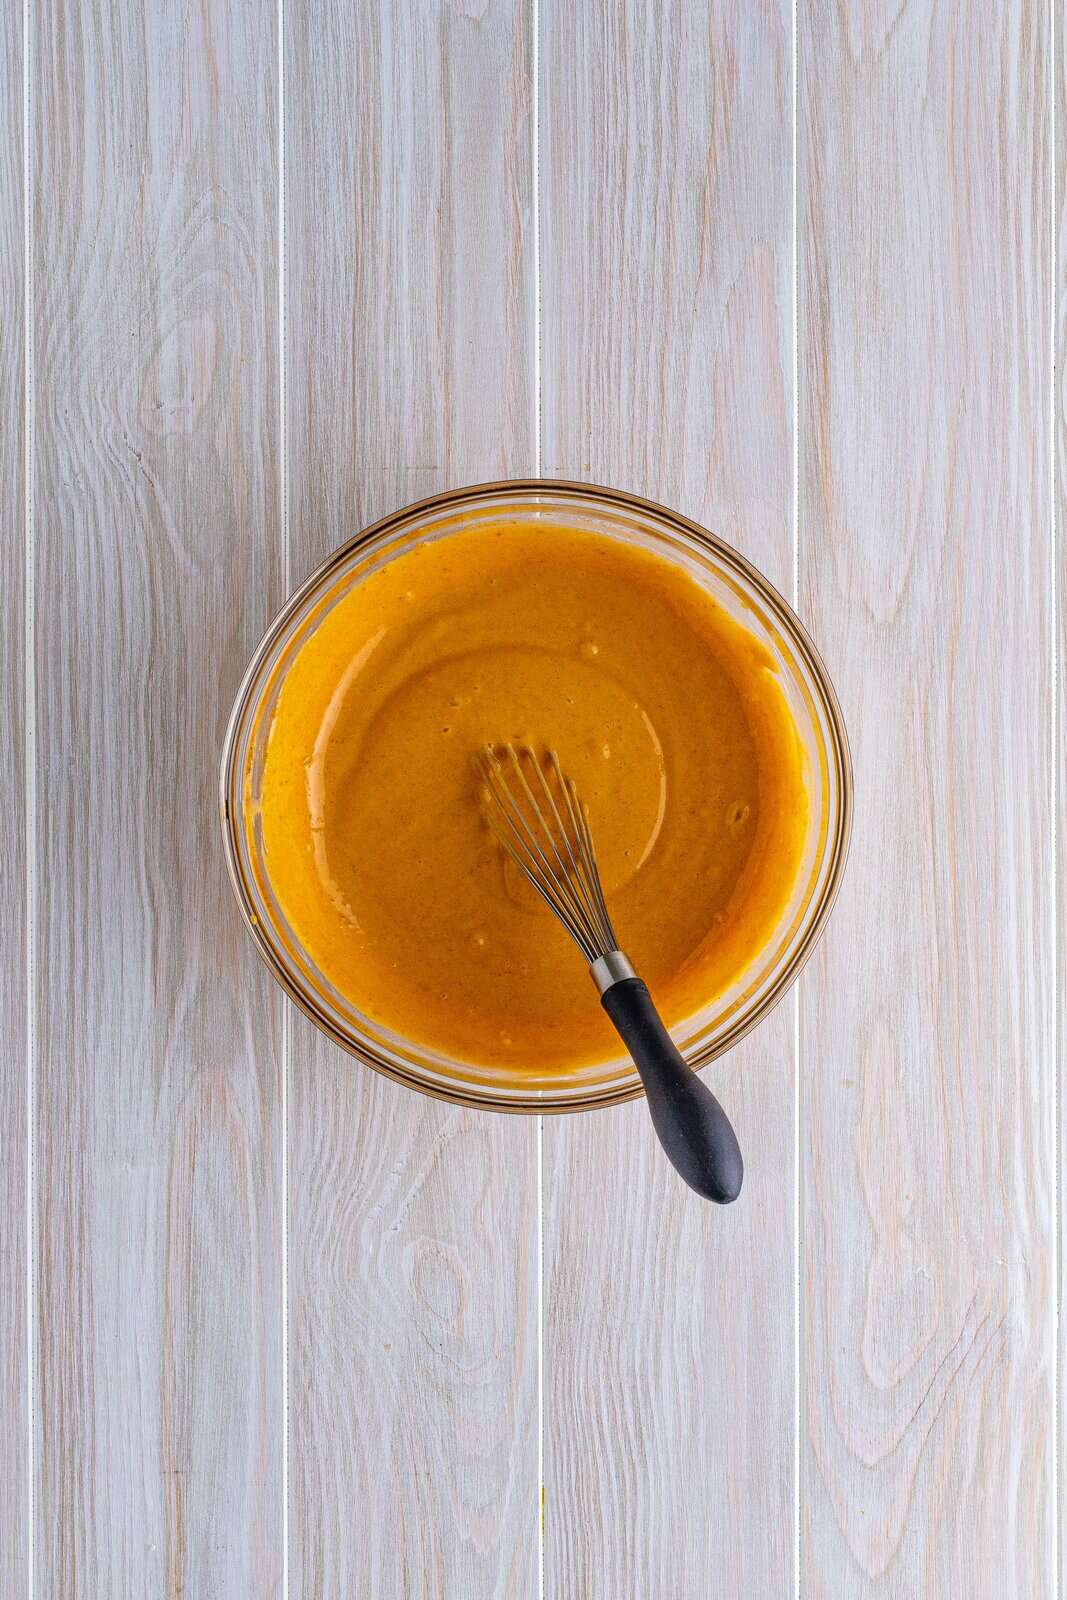 Pumpkin pudding whisked together in bowl.